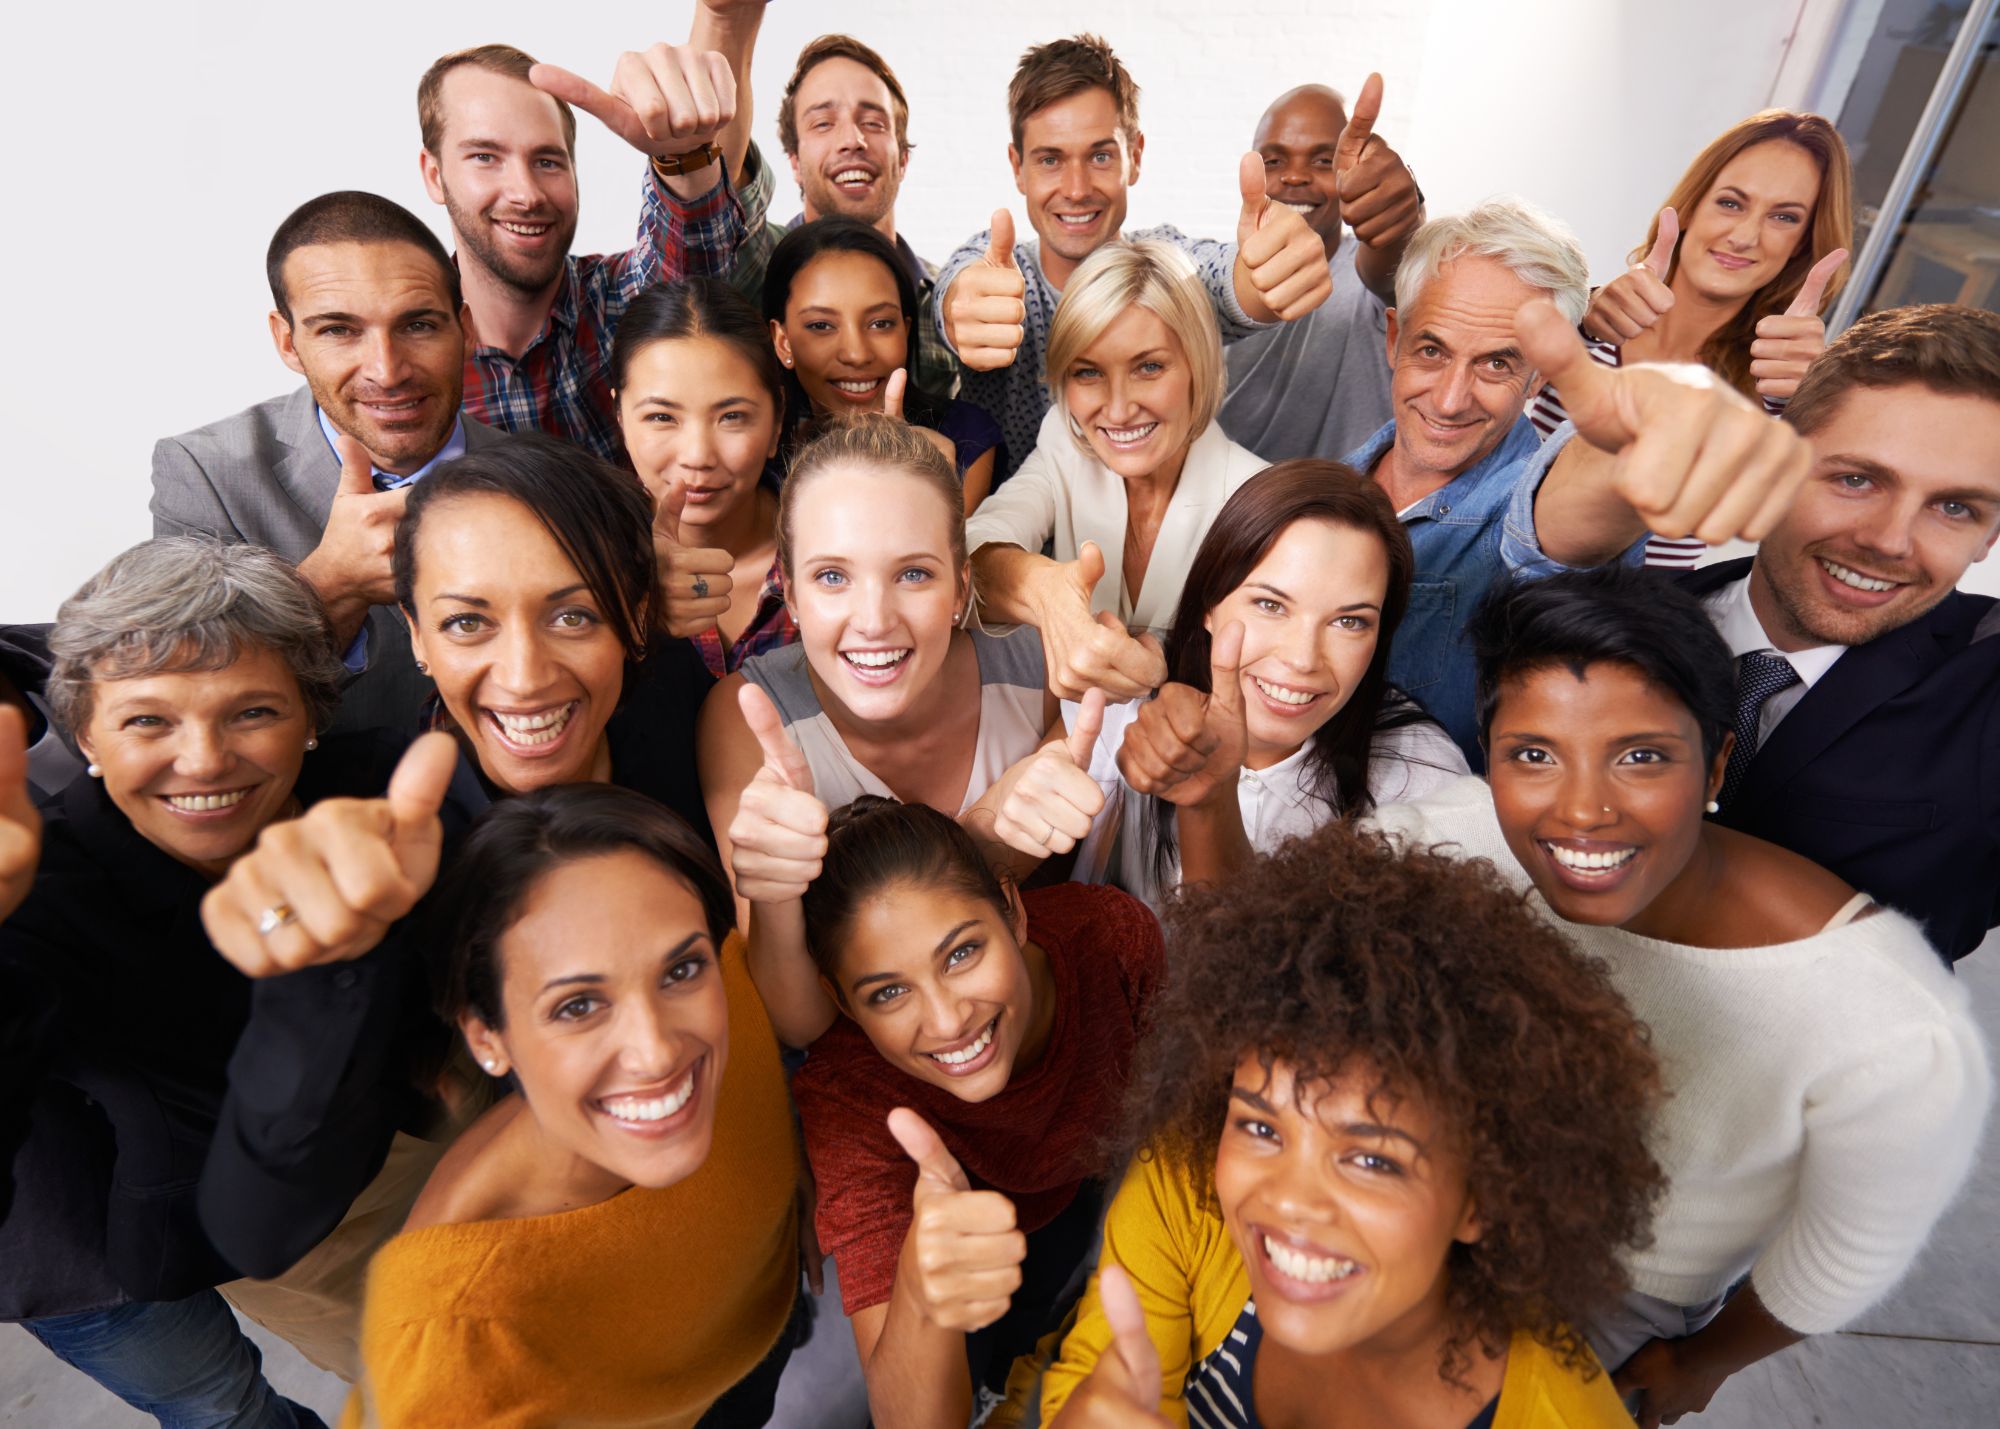 A group of diverse people smiling with thumbs up.